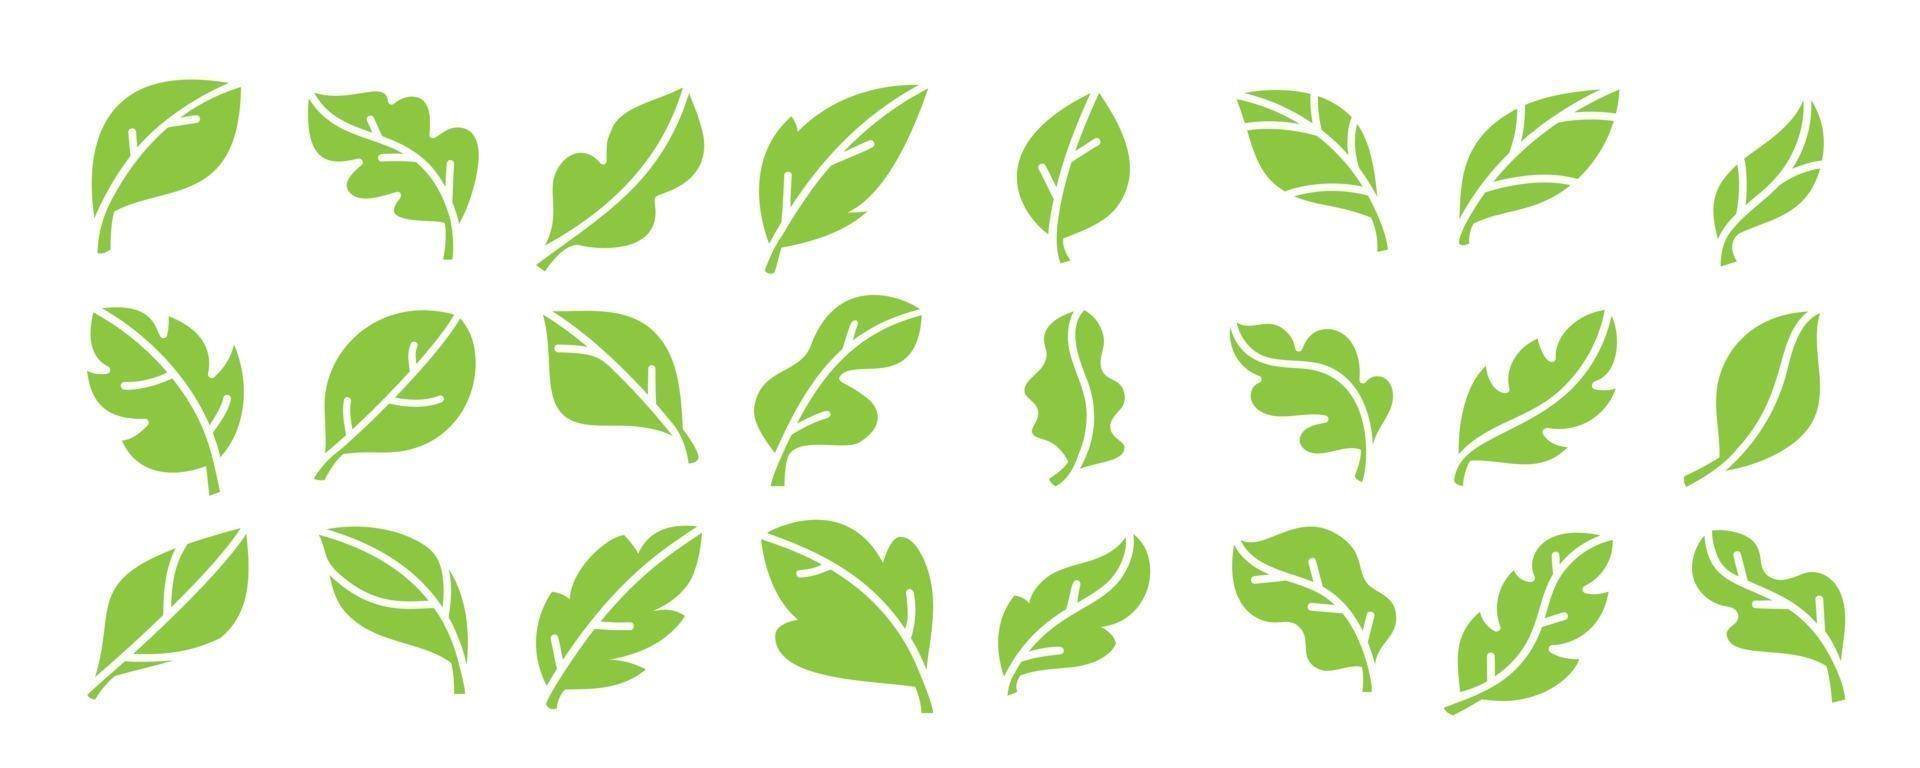 Leaf icons vector. Green leaves logo design collection. vector